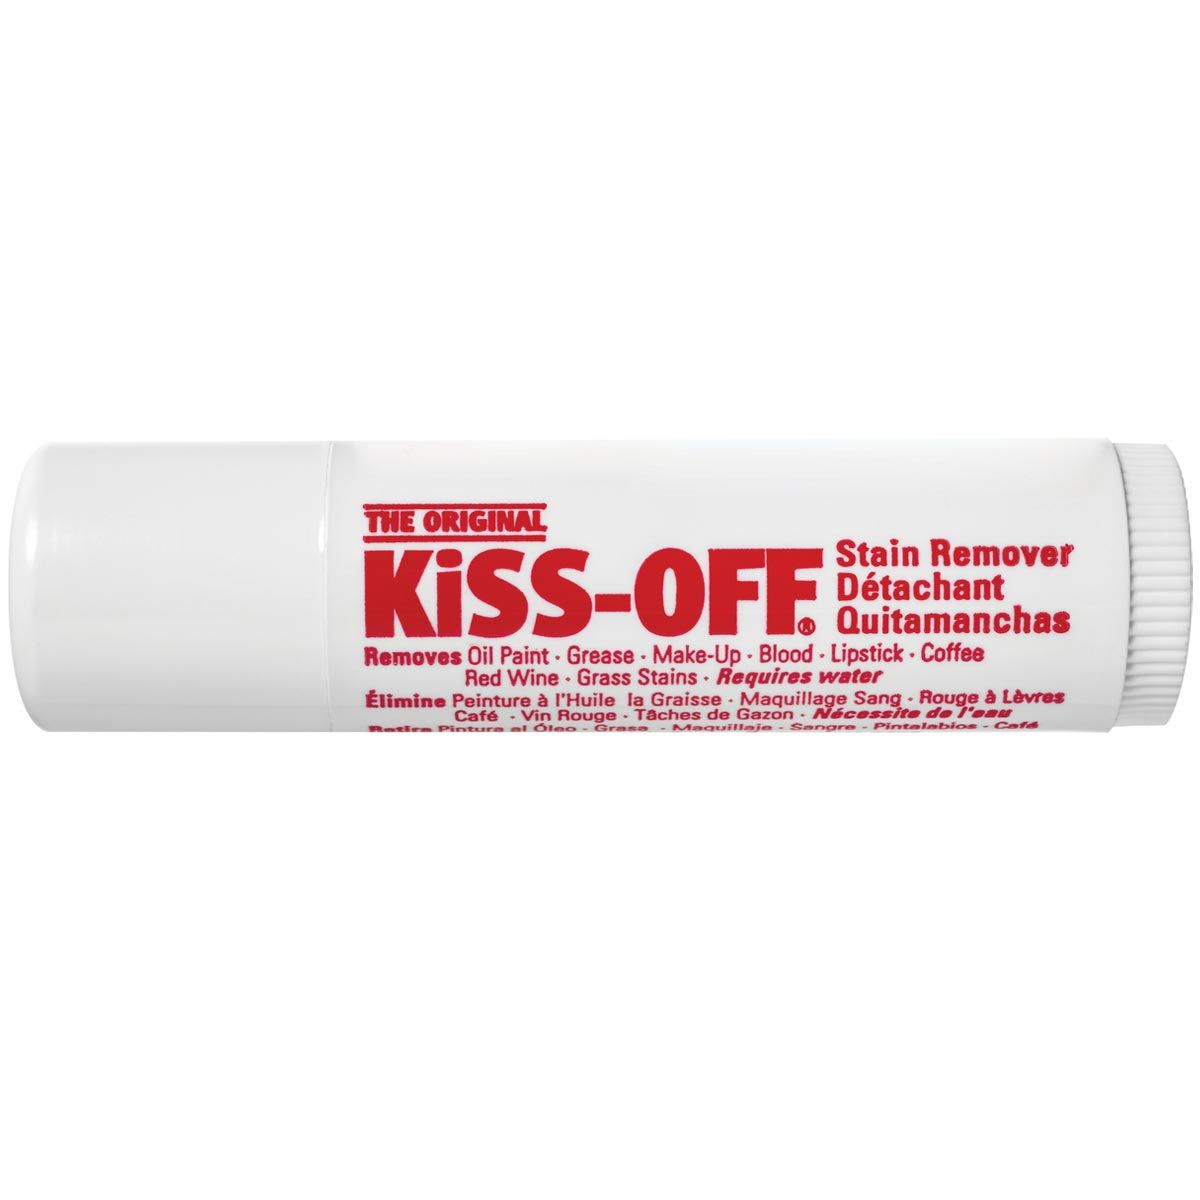 General's Original Kiss off Stain Remover 0.7 oz